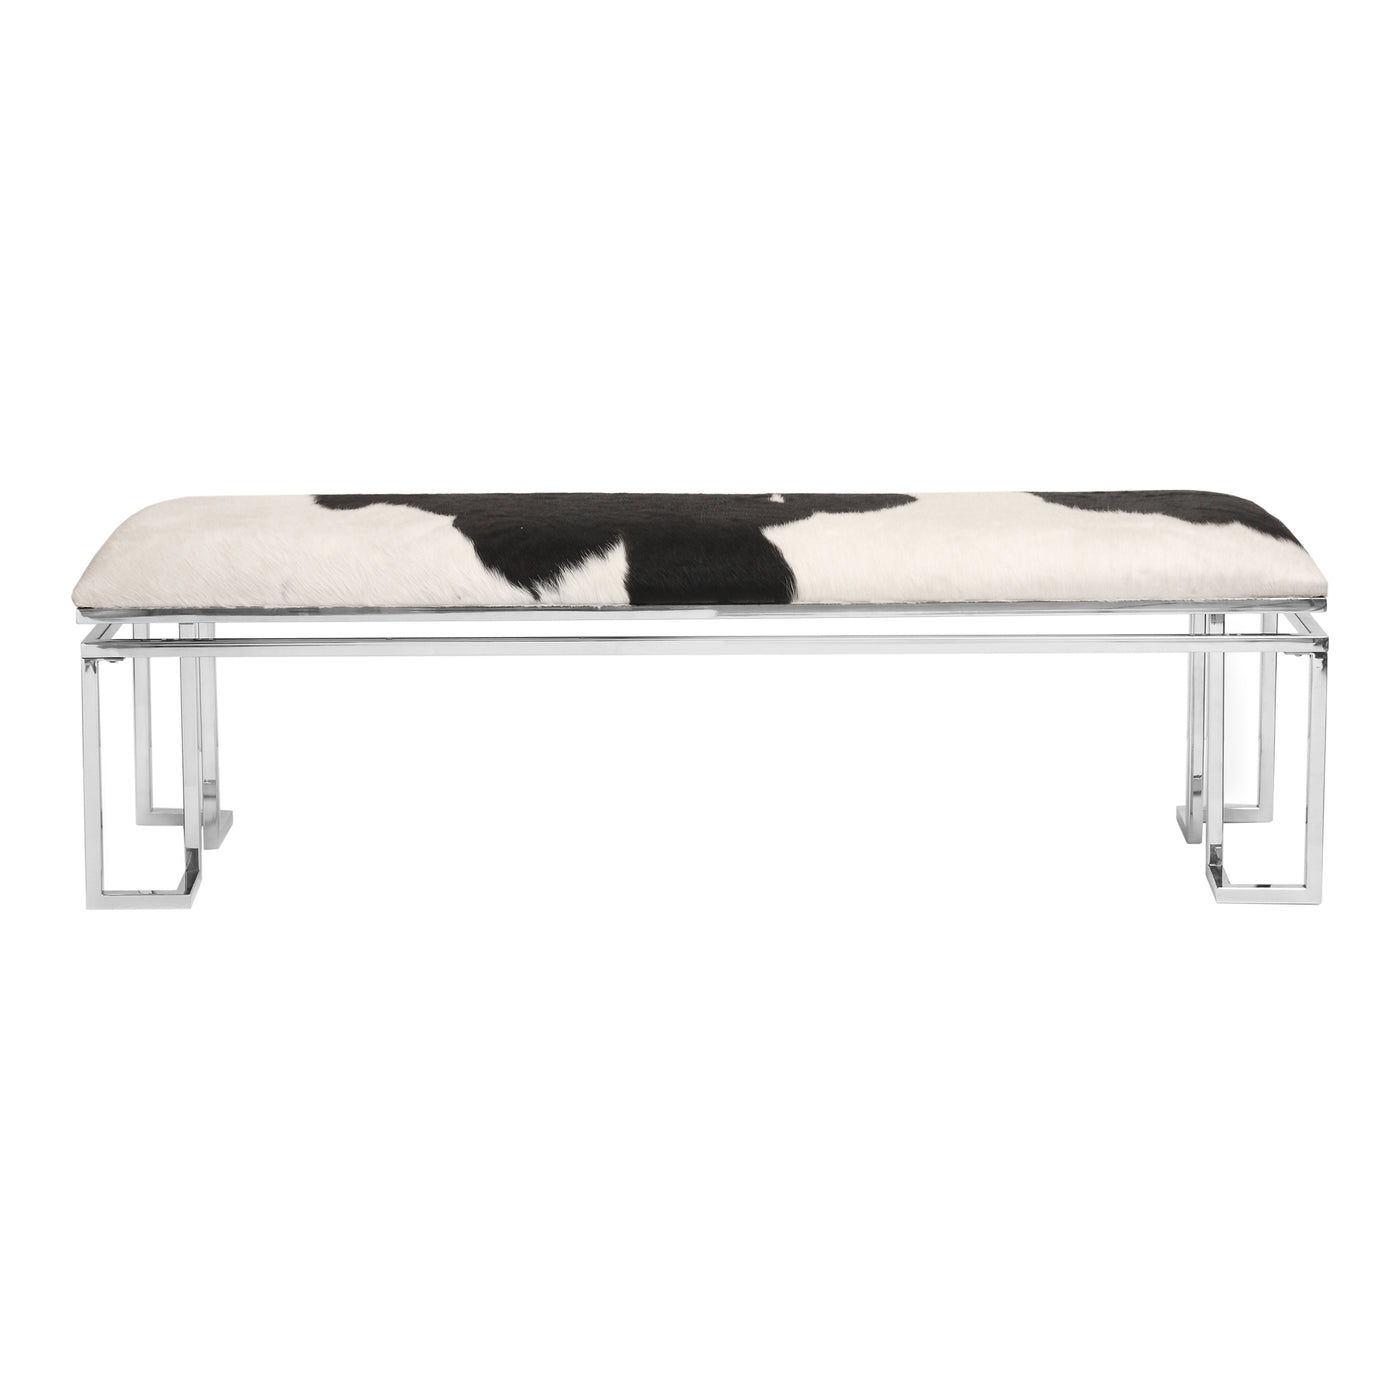 This modern bench combines unfinished cowhide on a slick stainless steel frame for a fashionable, designer look. Ideal ent...